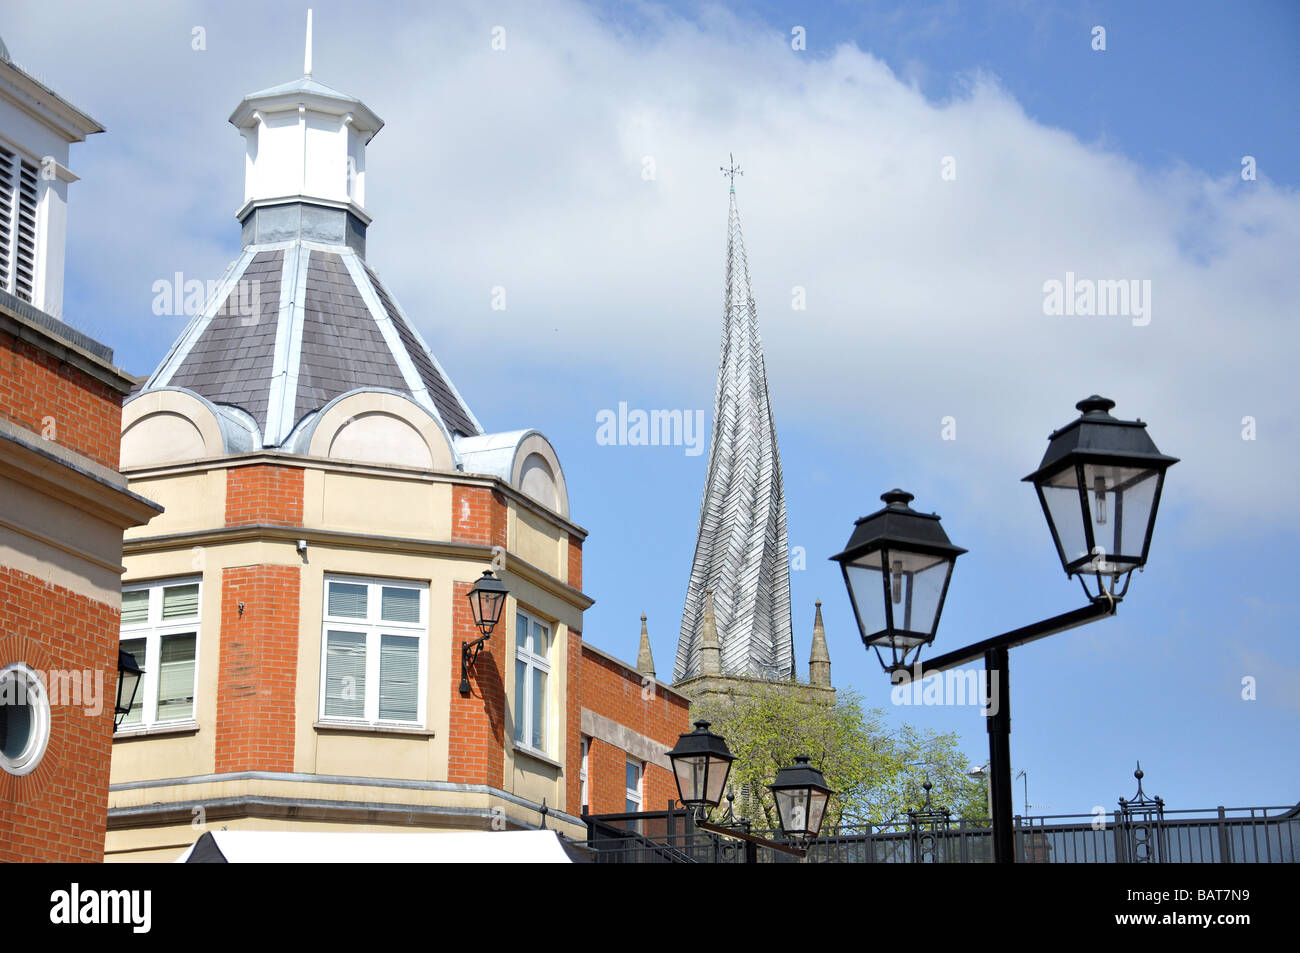 Crooked spire and local architecture, Chesterfield, Derbyshire, England, United Kingdom Stock Photo